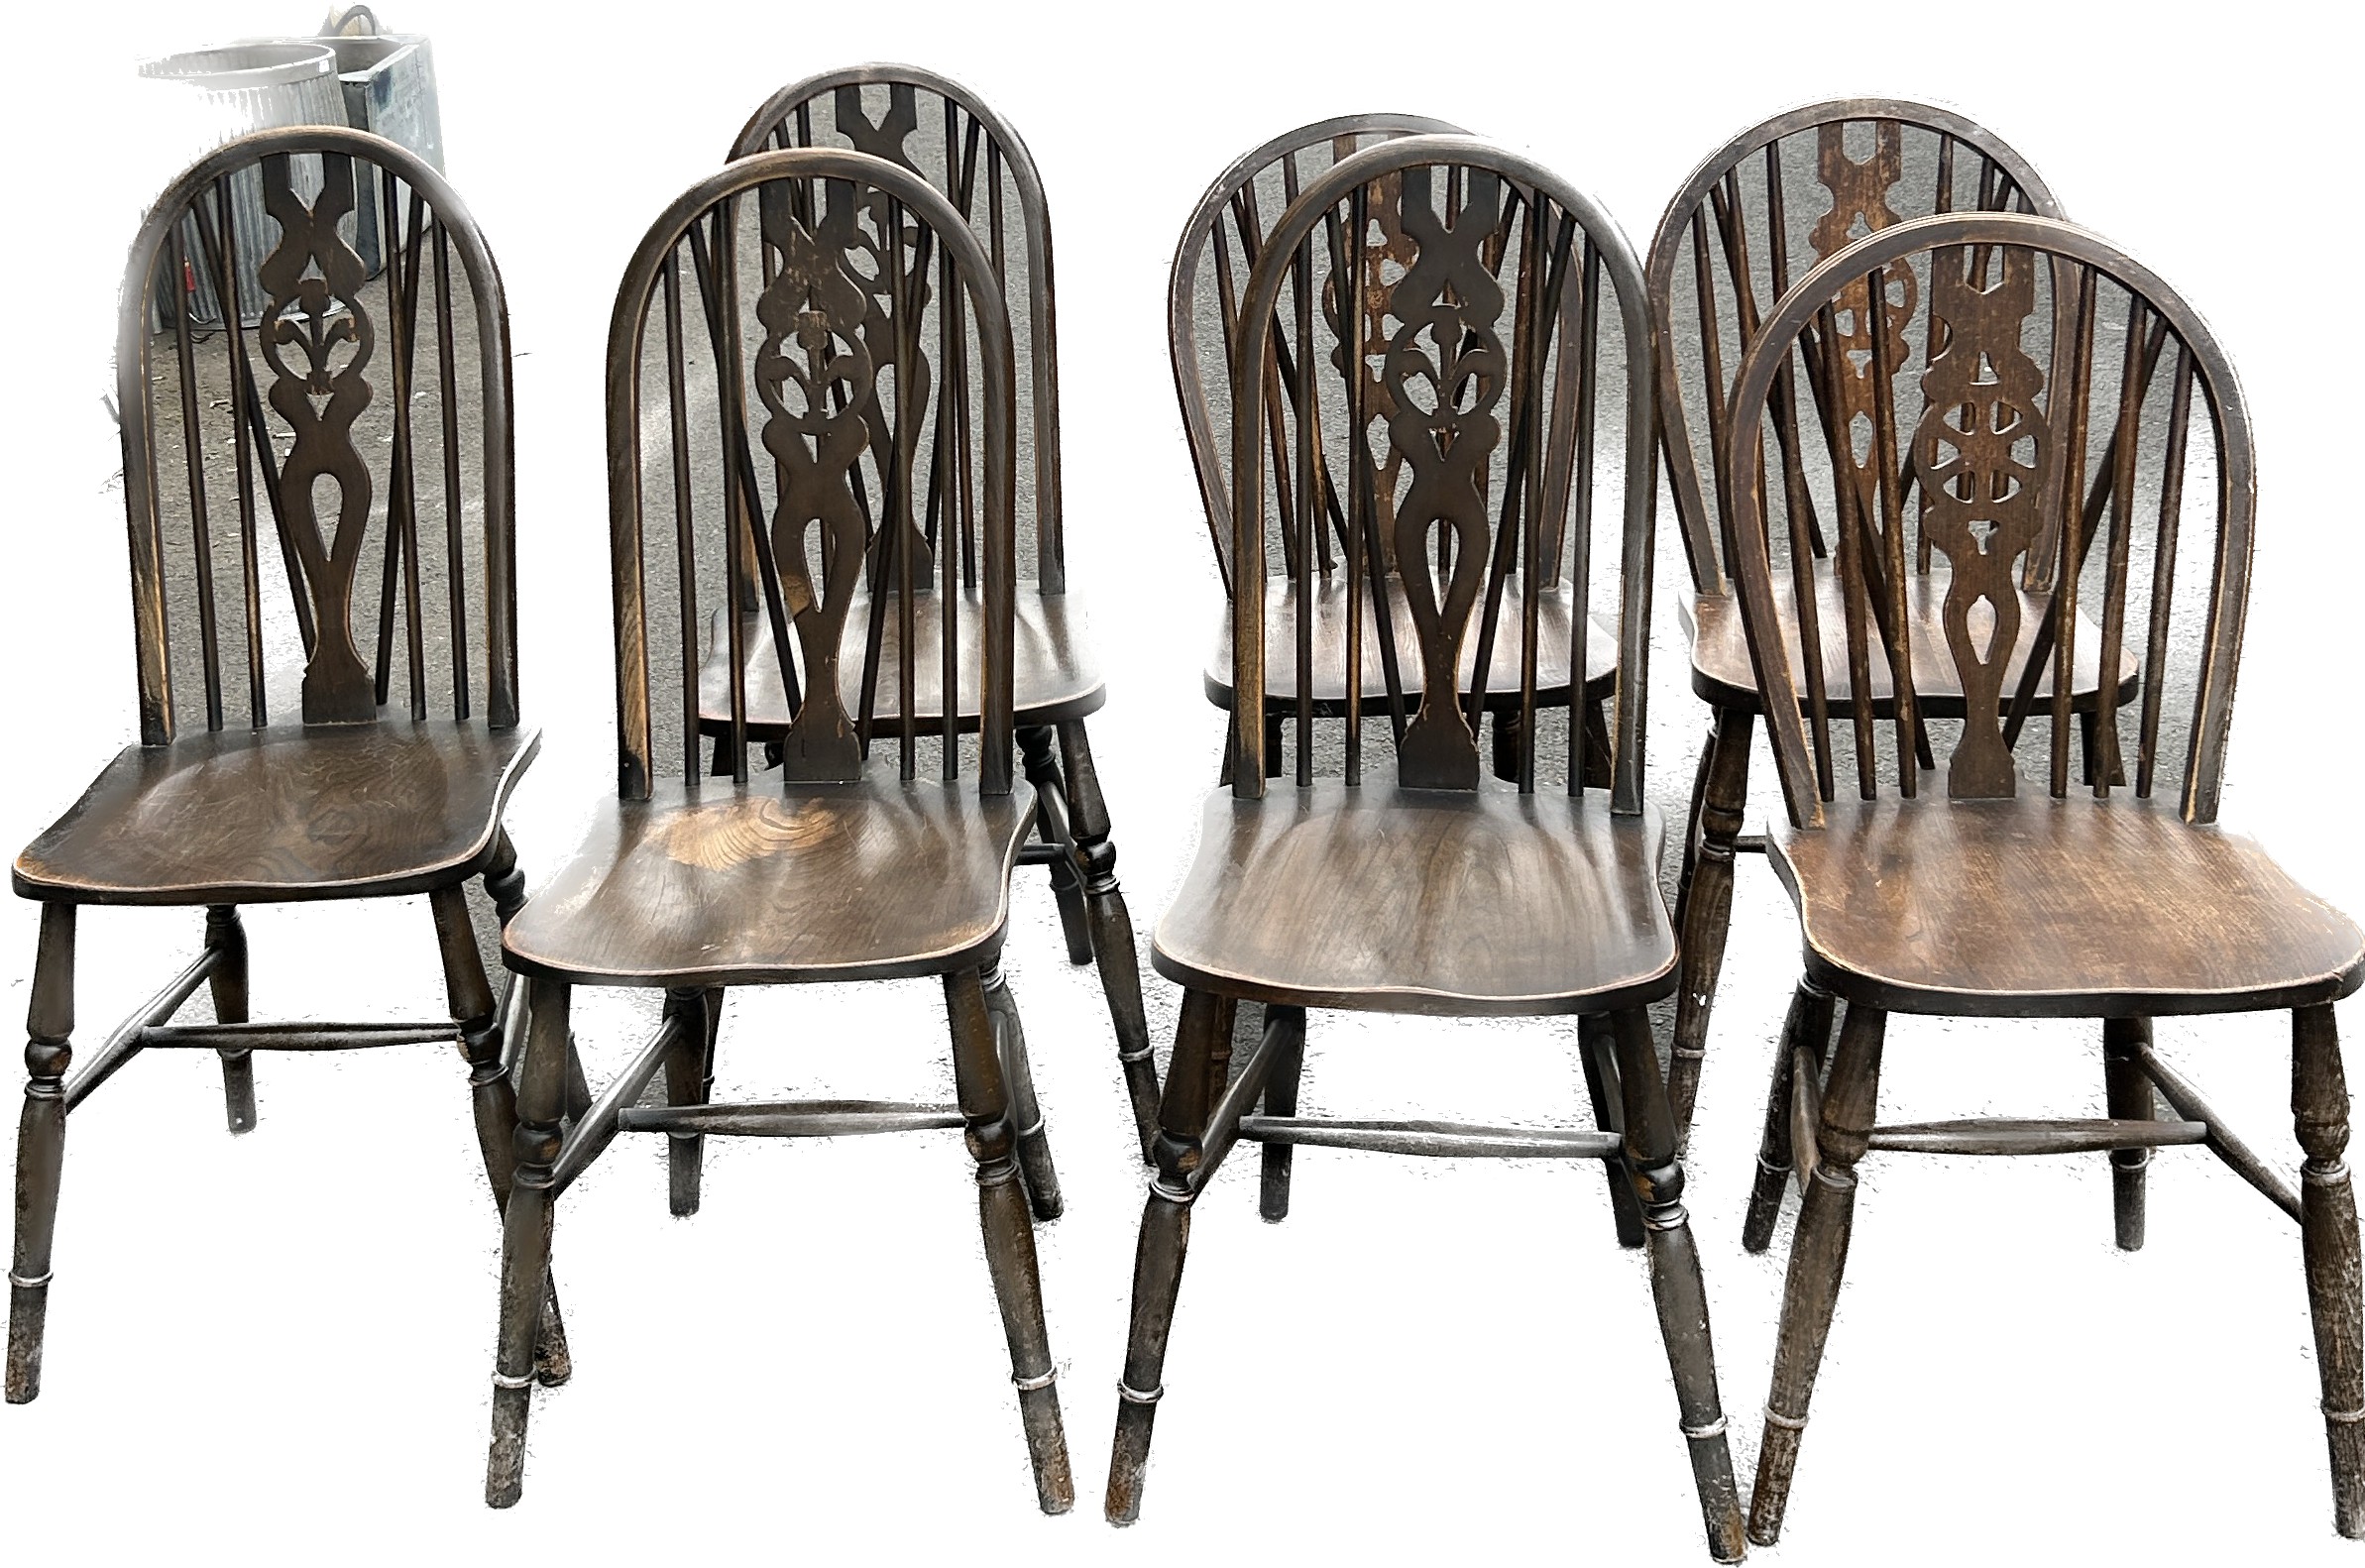 7 Oak wheelback dining chairs to include, set of 3 and 4